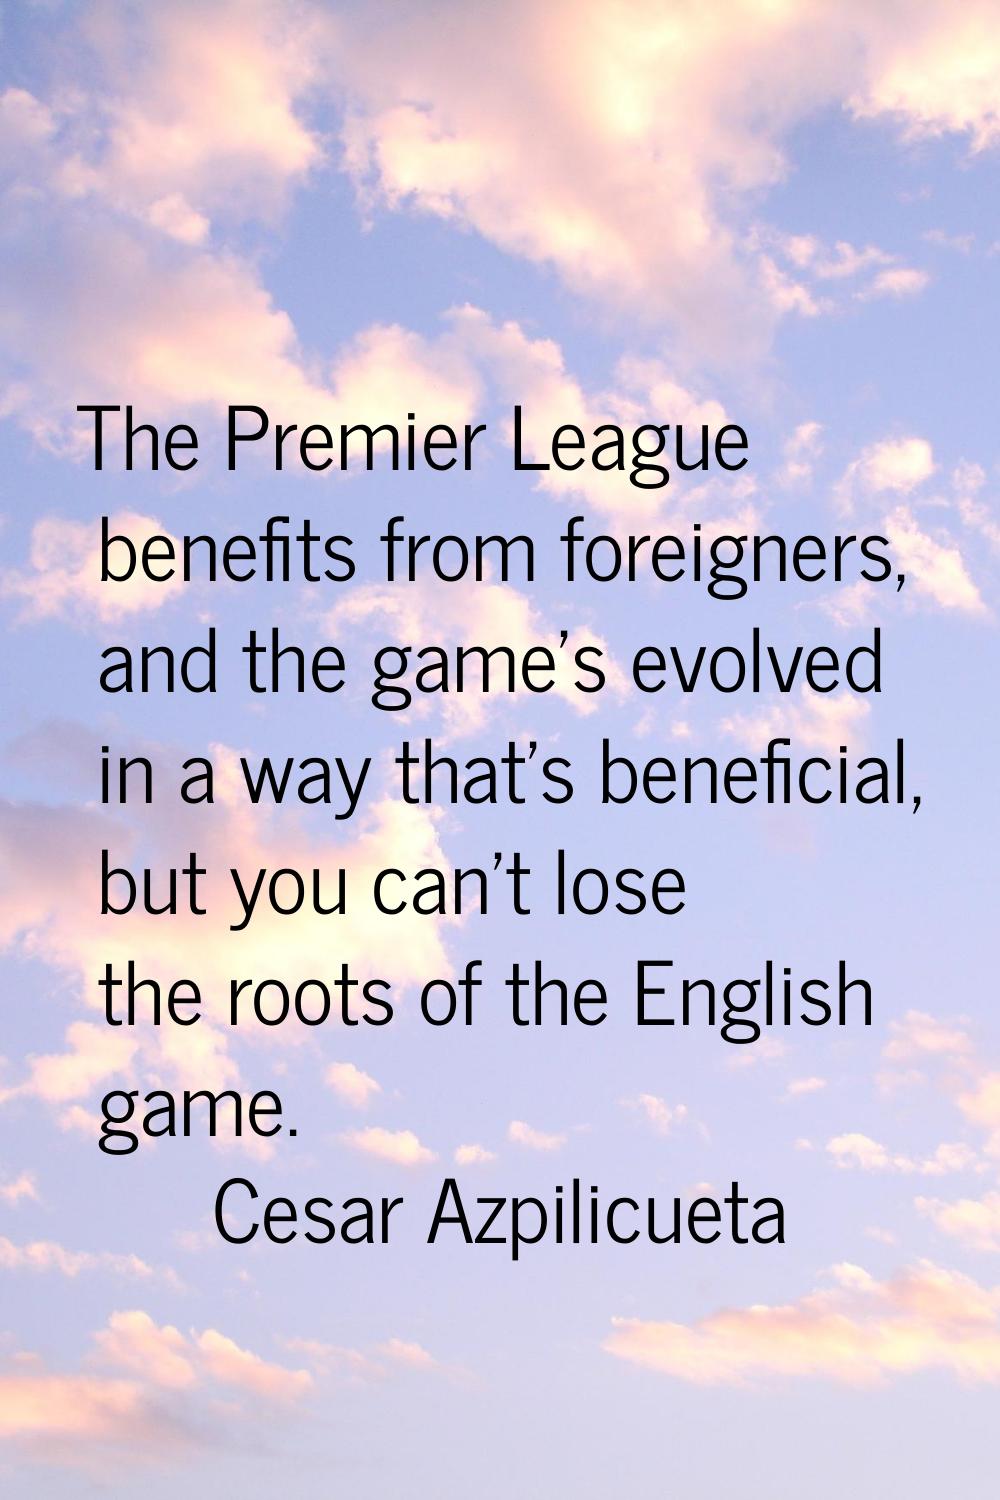 The Premier League benefits from foreigners, and the game's evolved in a way that's beneficial, but